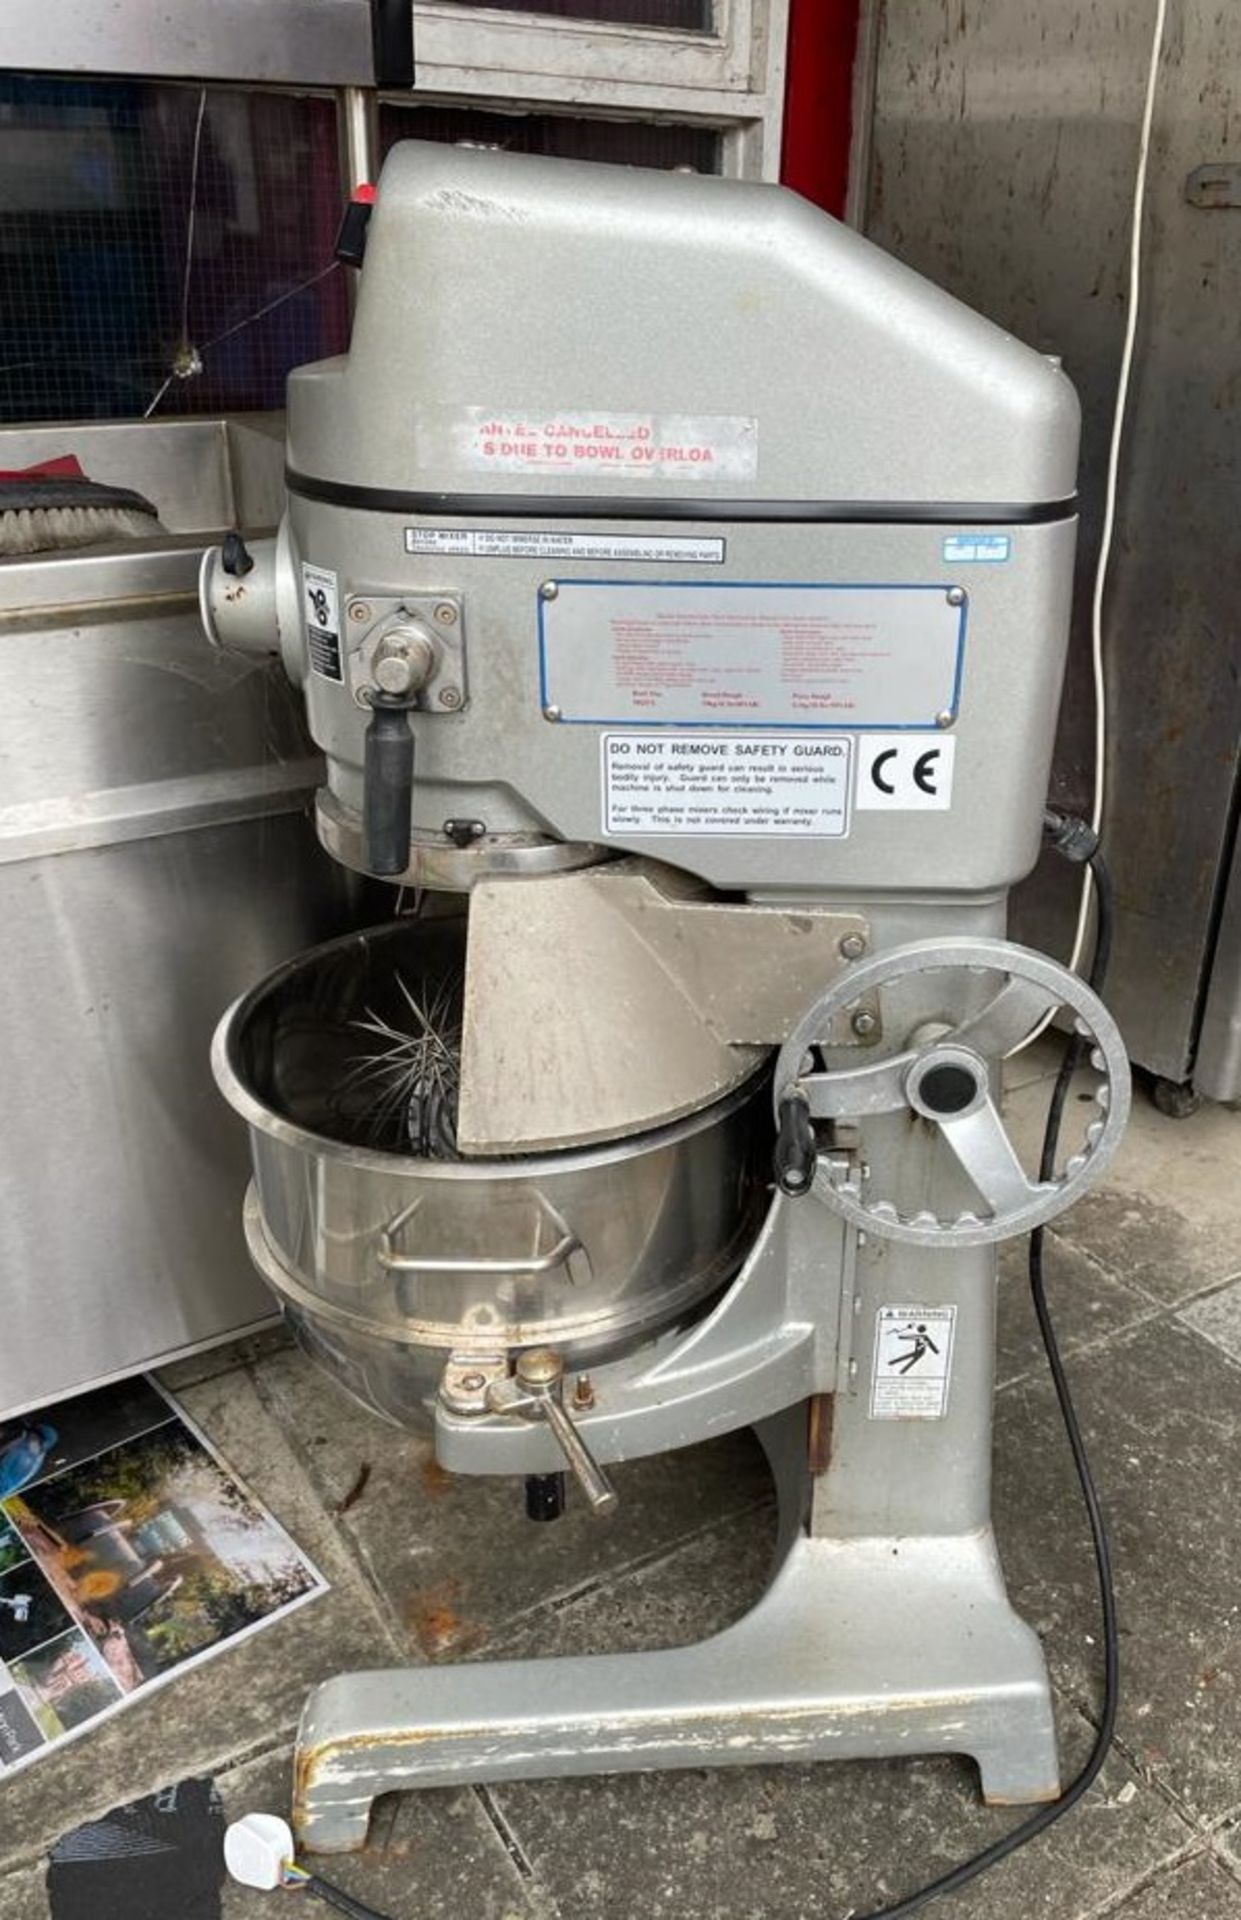 1 x Chef Quip Mixing Mincing Machine With Bowl and Attachment - CL667 - Location: Brighton,